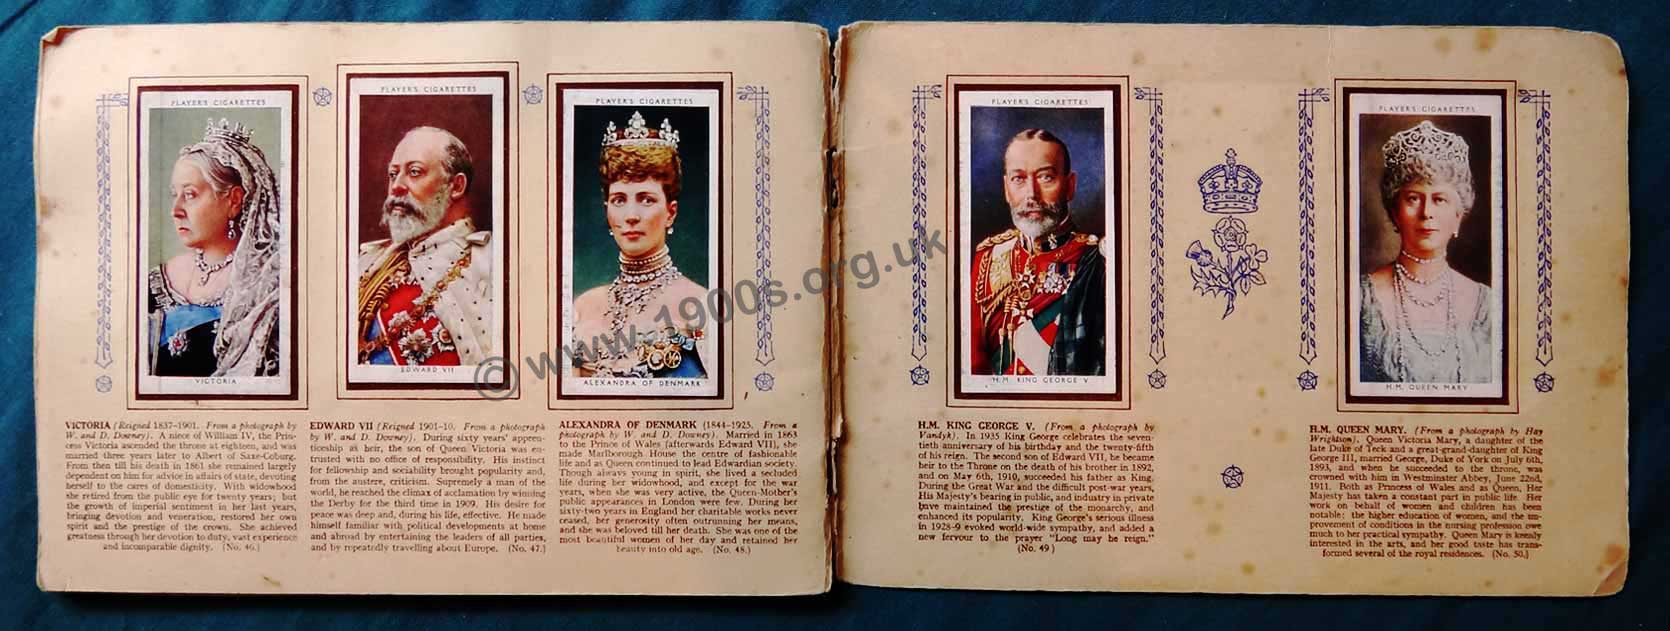 double page spread of a 1930s cigarette card album put up by Players Cigarettes with the theme of English kings and queens 1066-1939. 